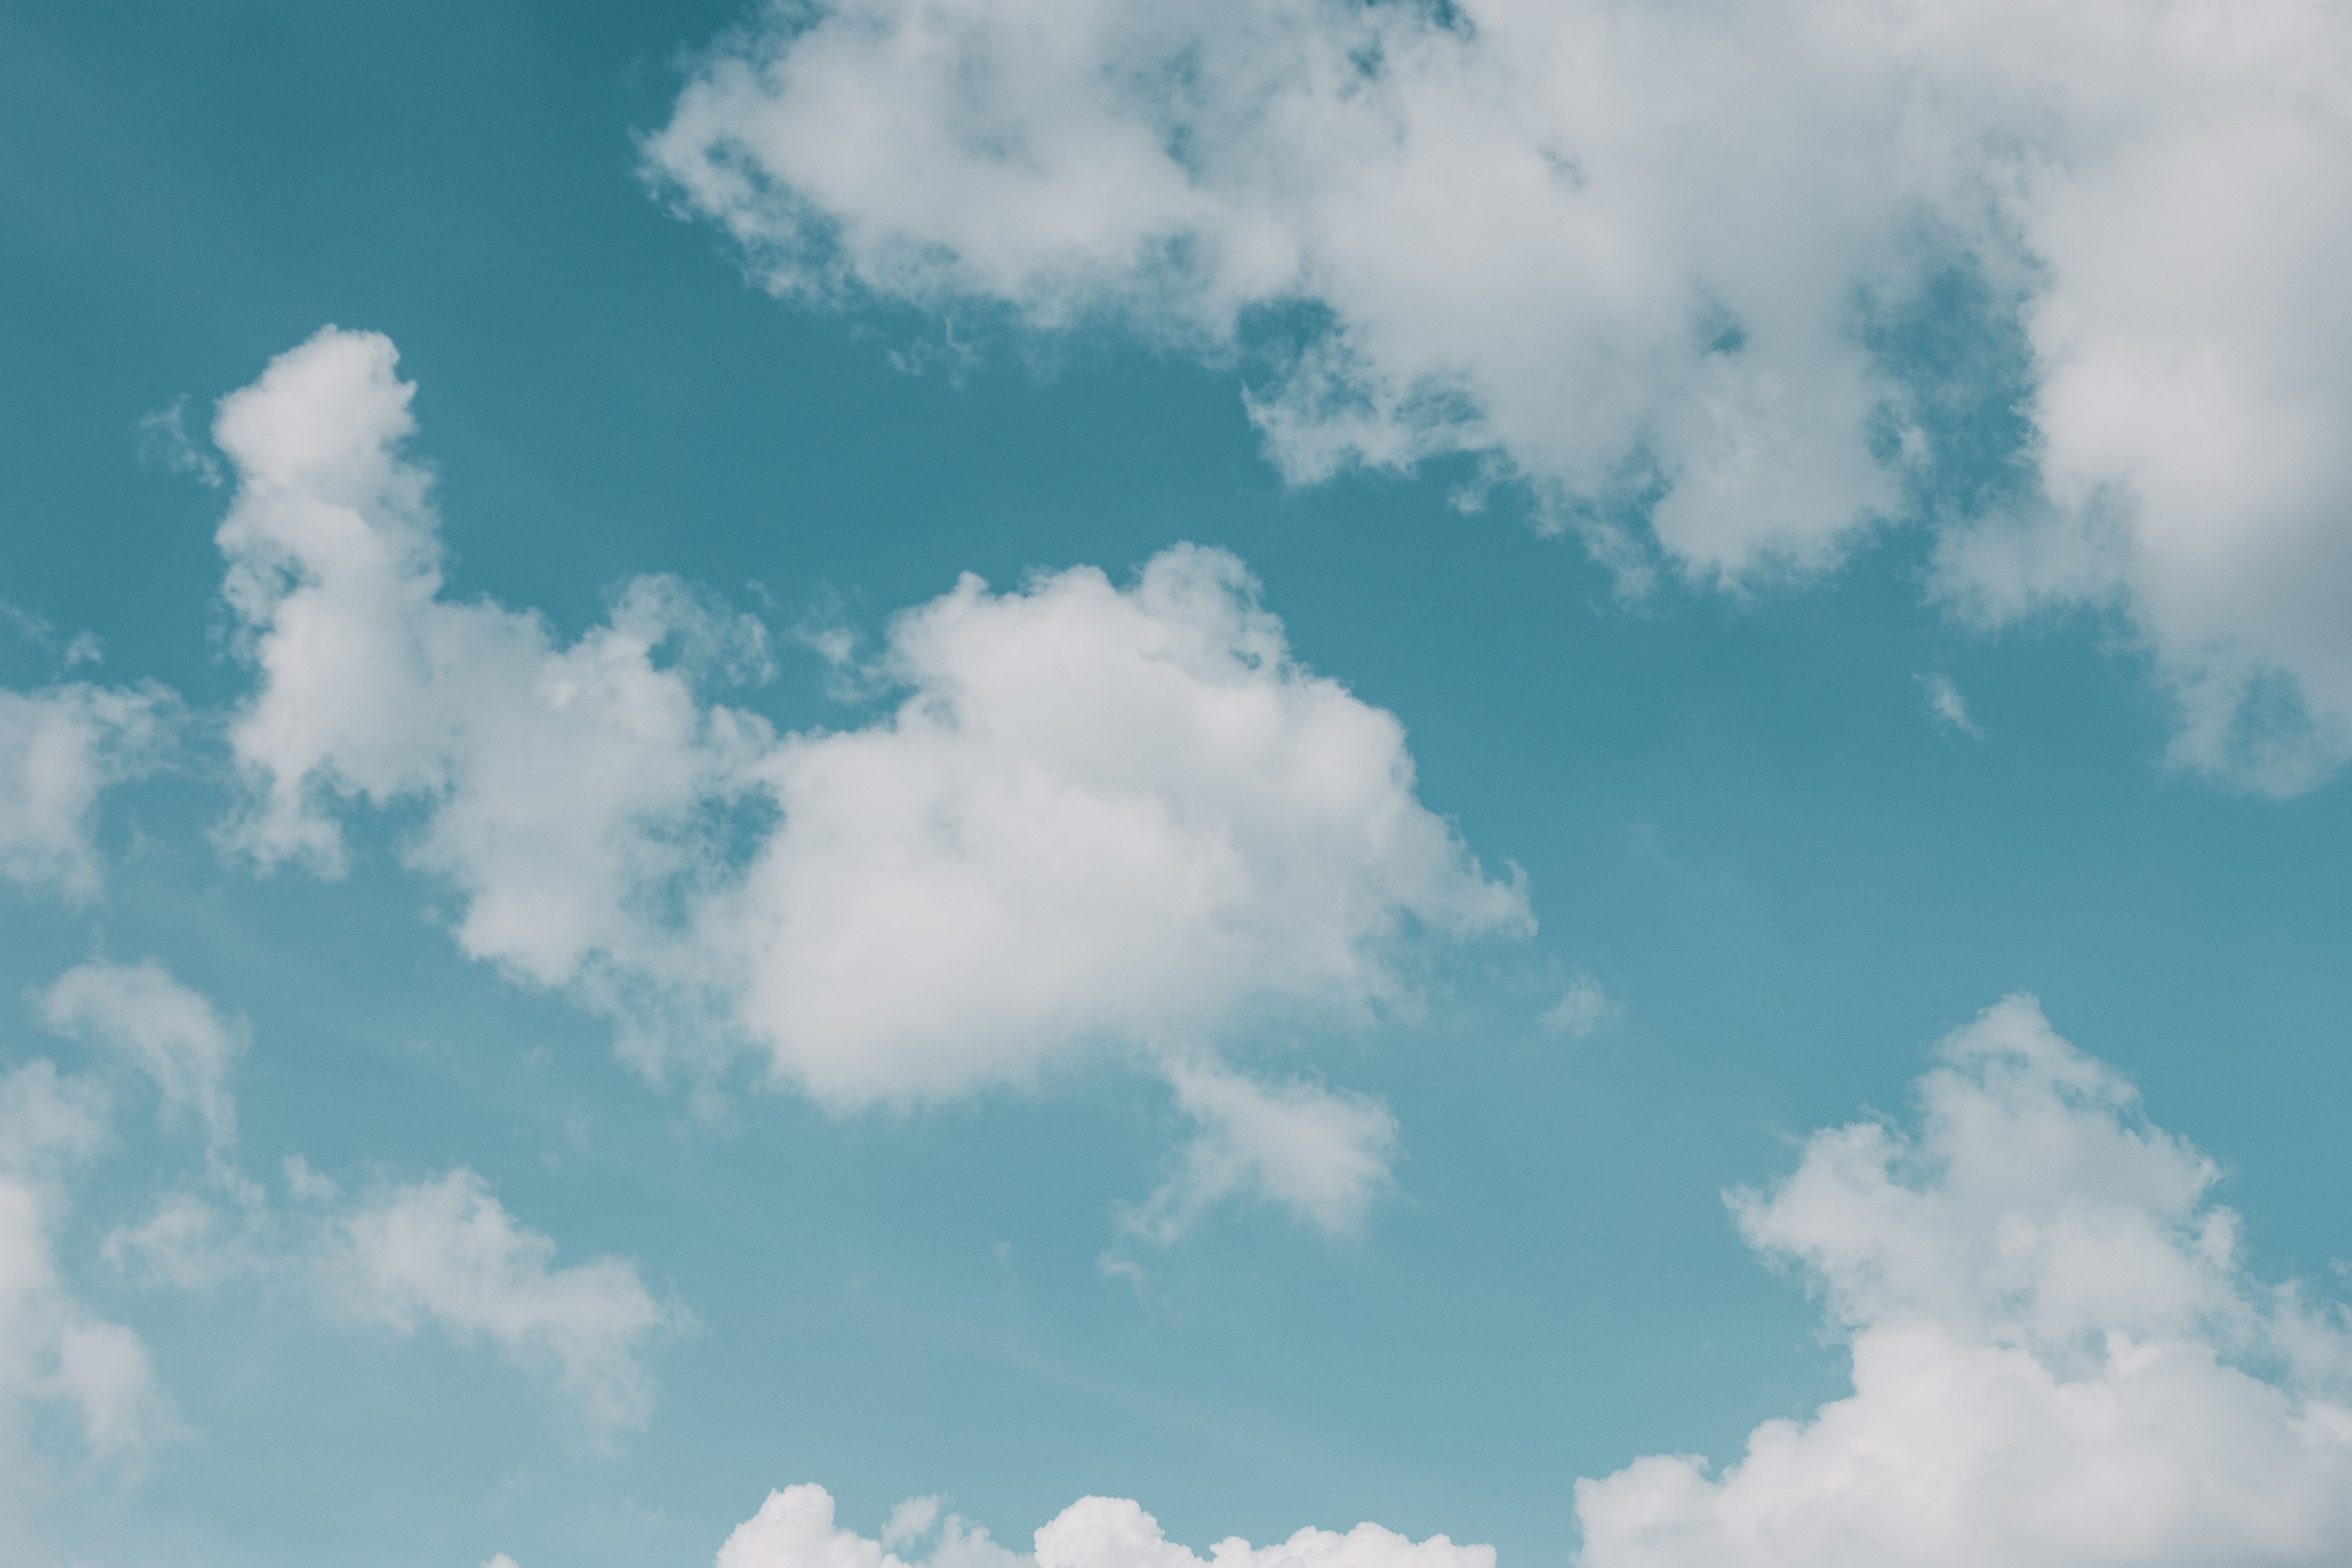 5184x3456 Public domain image, minimal, cool background, minimalistic, wallpaper, free, landscape, cool wallpaper, nature, cloudscape, photo, minimalism, minimalist, chill, sky, traveling, blue sky, cloud, texture, summer, blue. Mocah.org HD